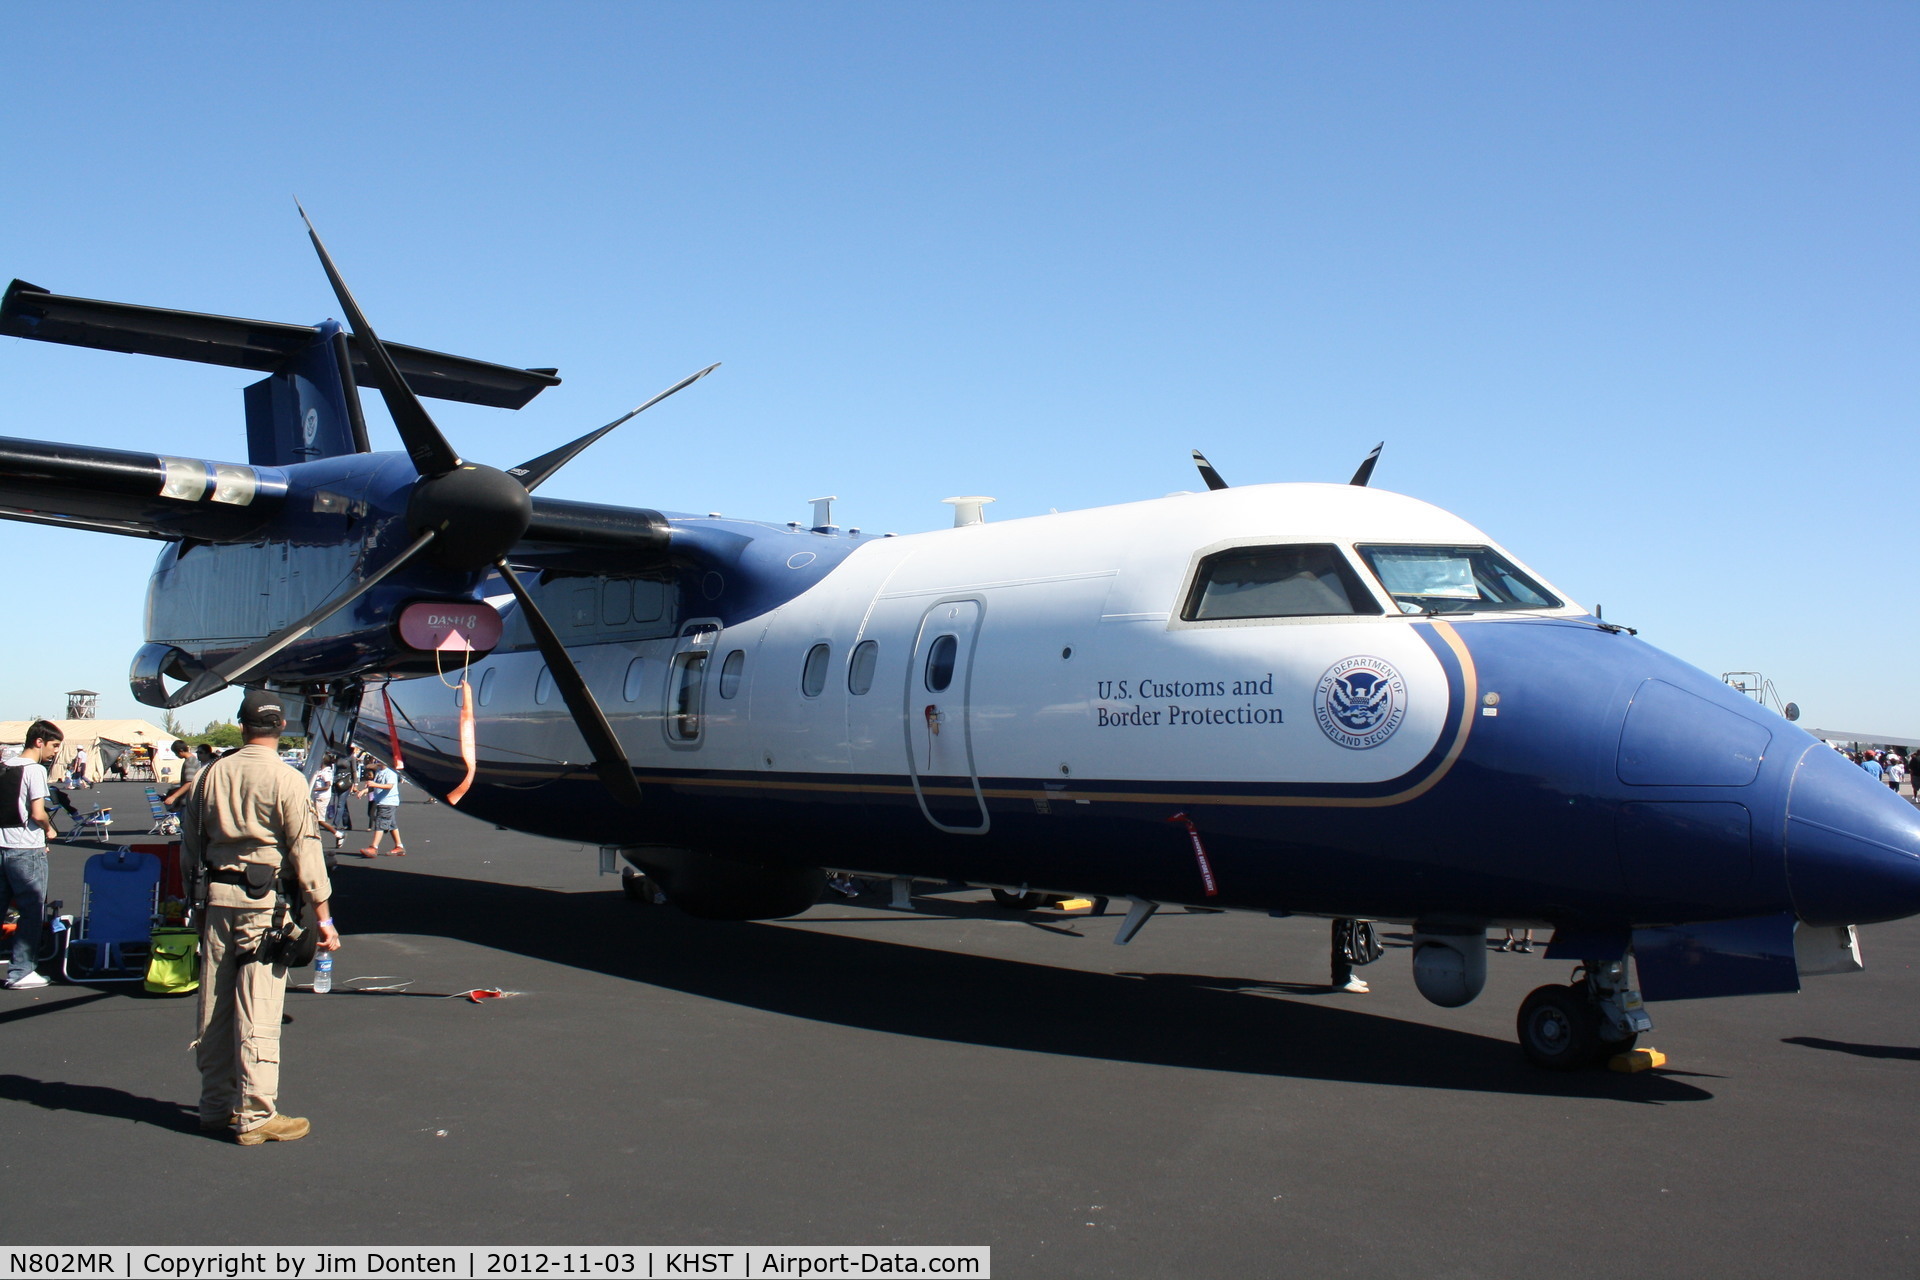 N802MR, 2005 Bombardier DHC-8-202 Dash 8 C/N 612, Bombardier Dash-8 (N802MR) of the Department of Homeland Security US Customs and Border Protection on static display at Wings over Homestead